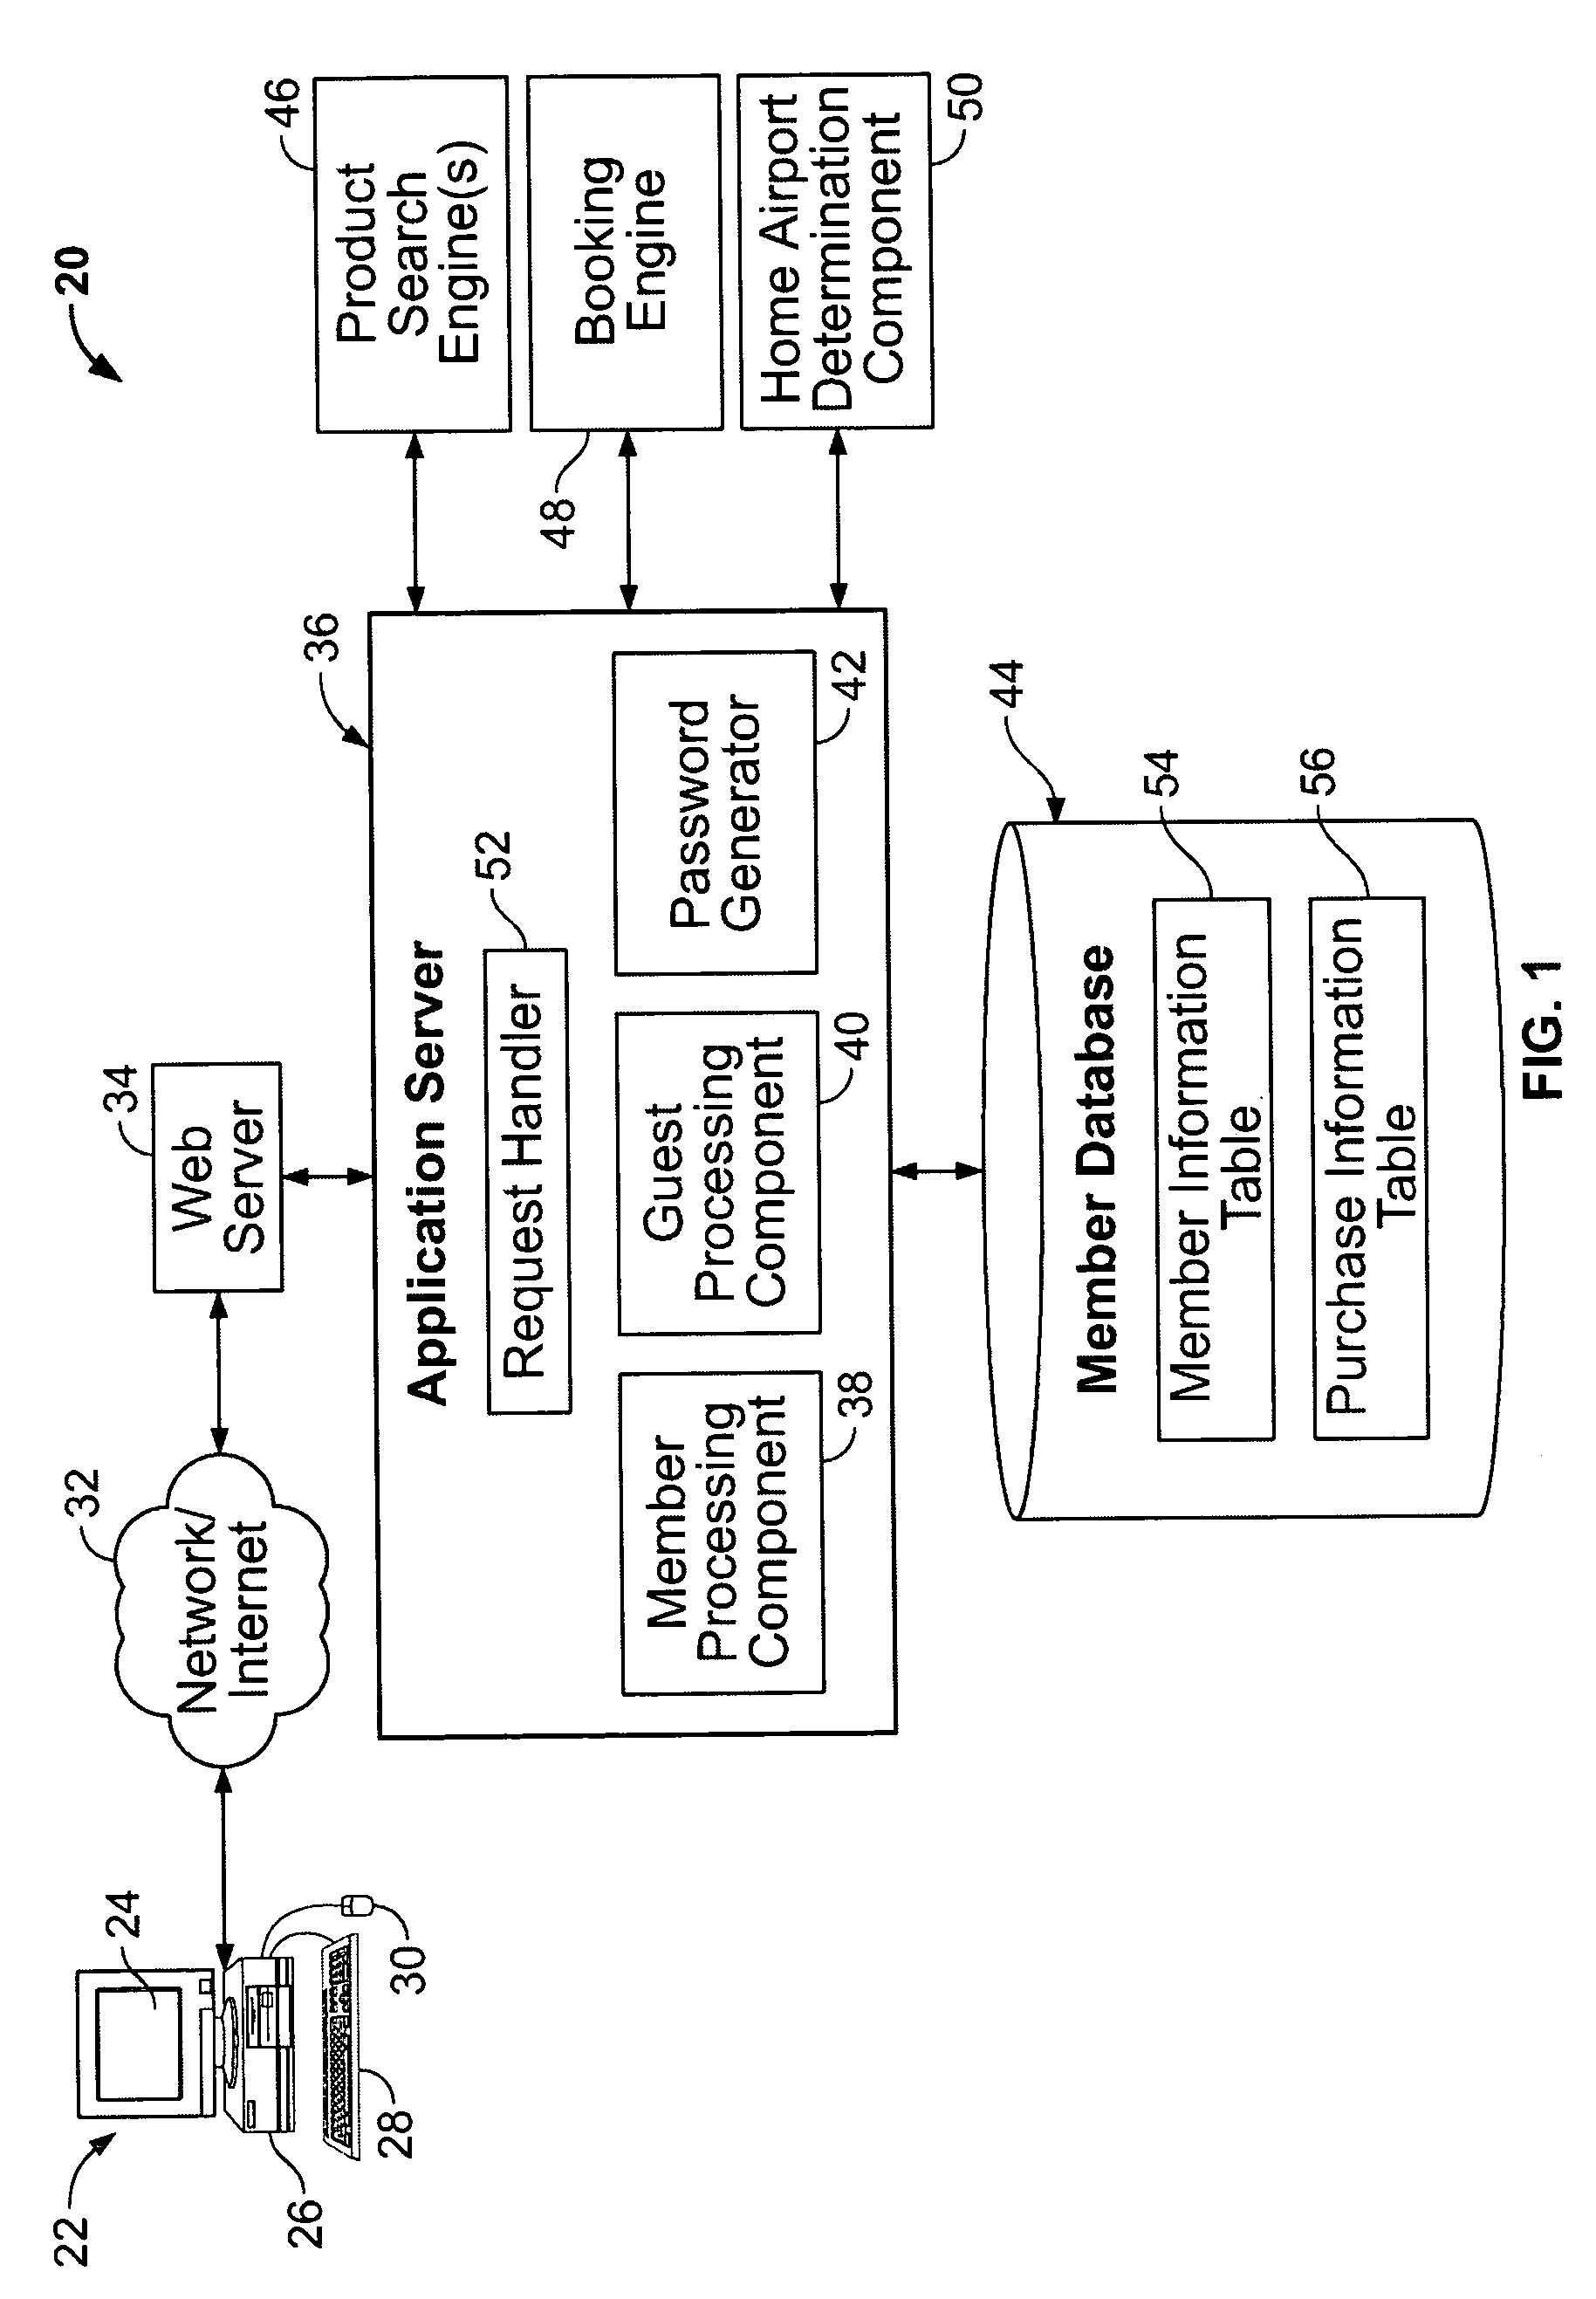 System and method for the on-line purchase of products through a guest registration